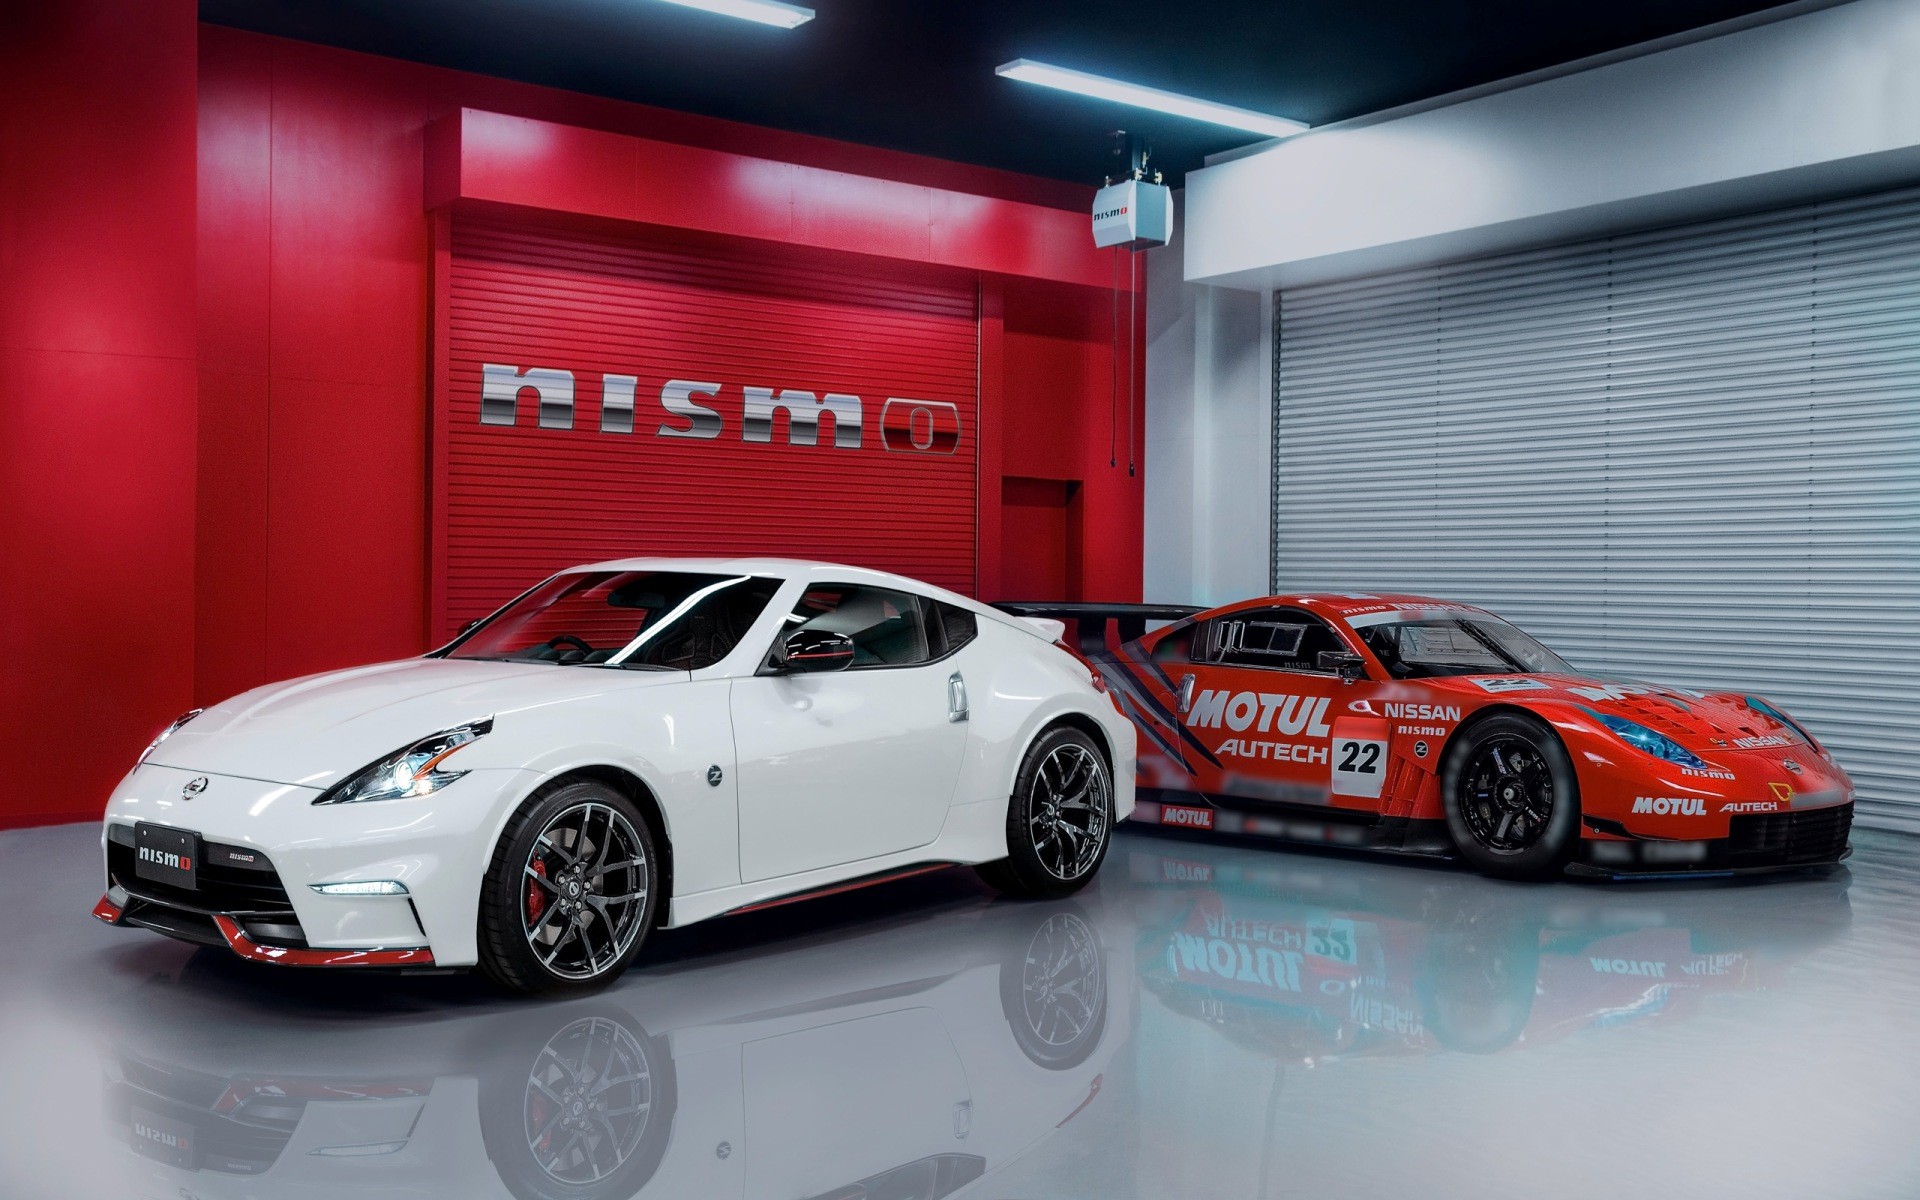 General 1920x1200 Nissan Nismo Nissan Fairlady Z car Nissan 370Z frontal view red cars vehicle white cars livery